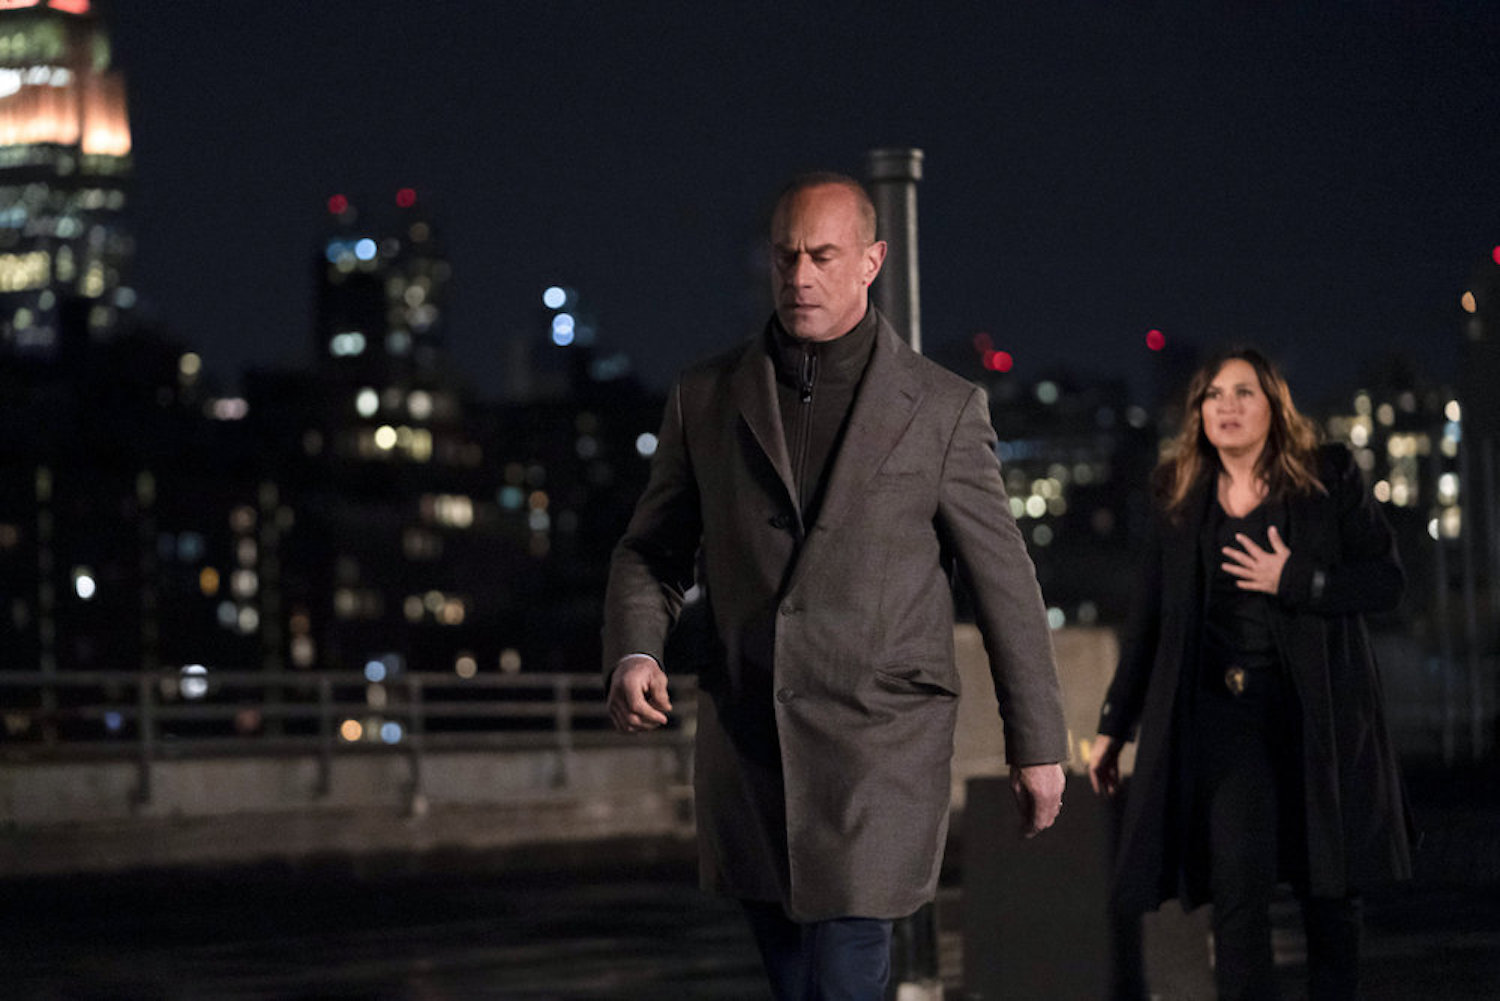 Benson Chases Stabler Law Order SVU Crossover